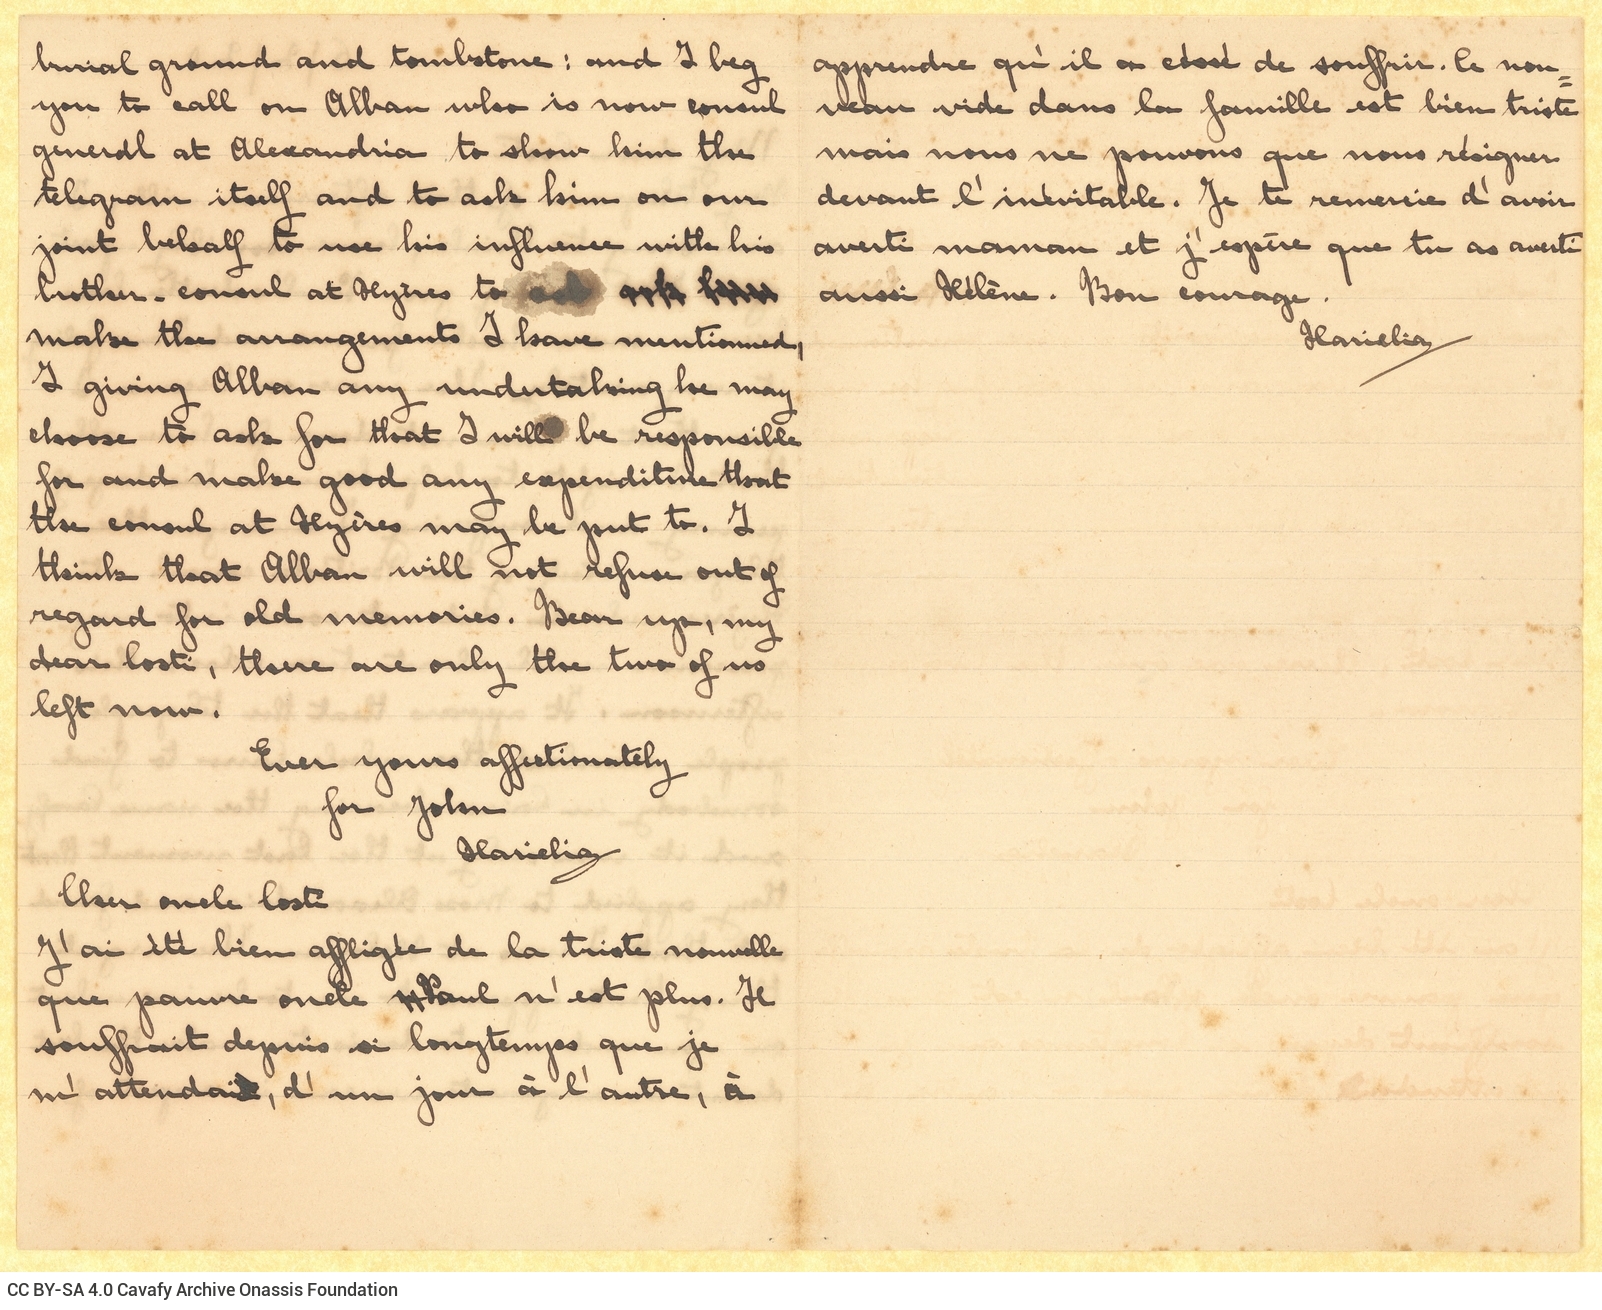 Handwritten letter by Charikleia Cavafy (Valieri) to Cavafy on the first three pages of a bifolio. The last page is blank.